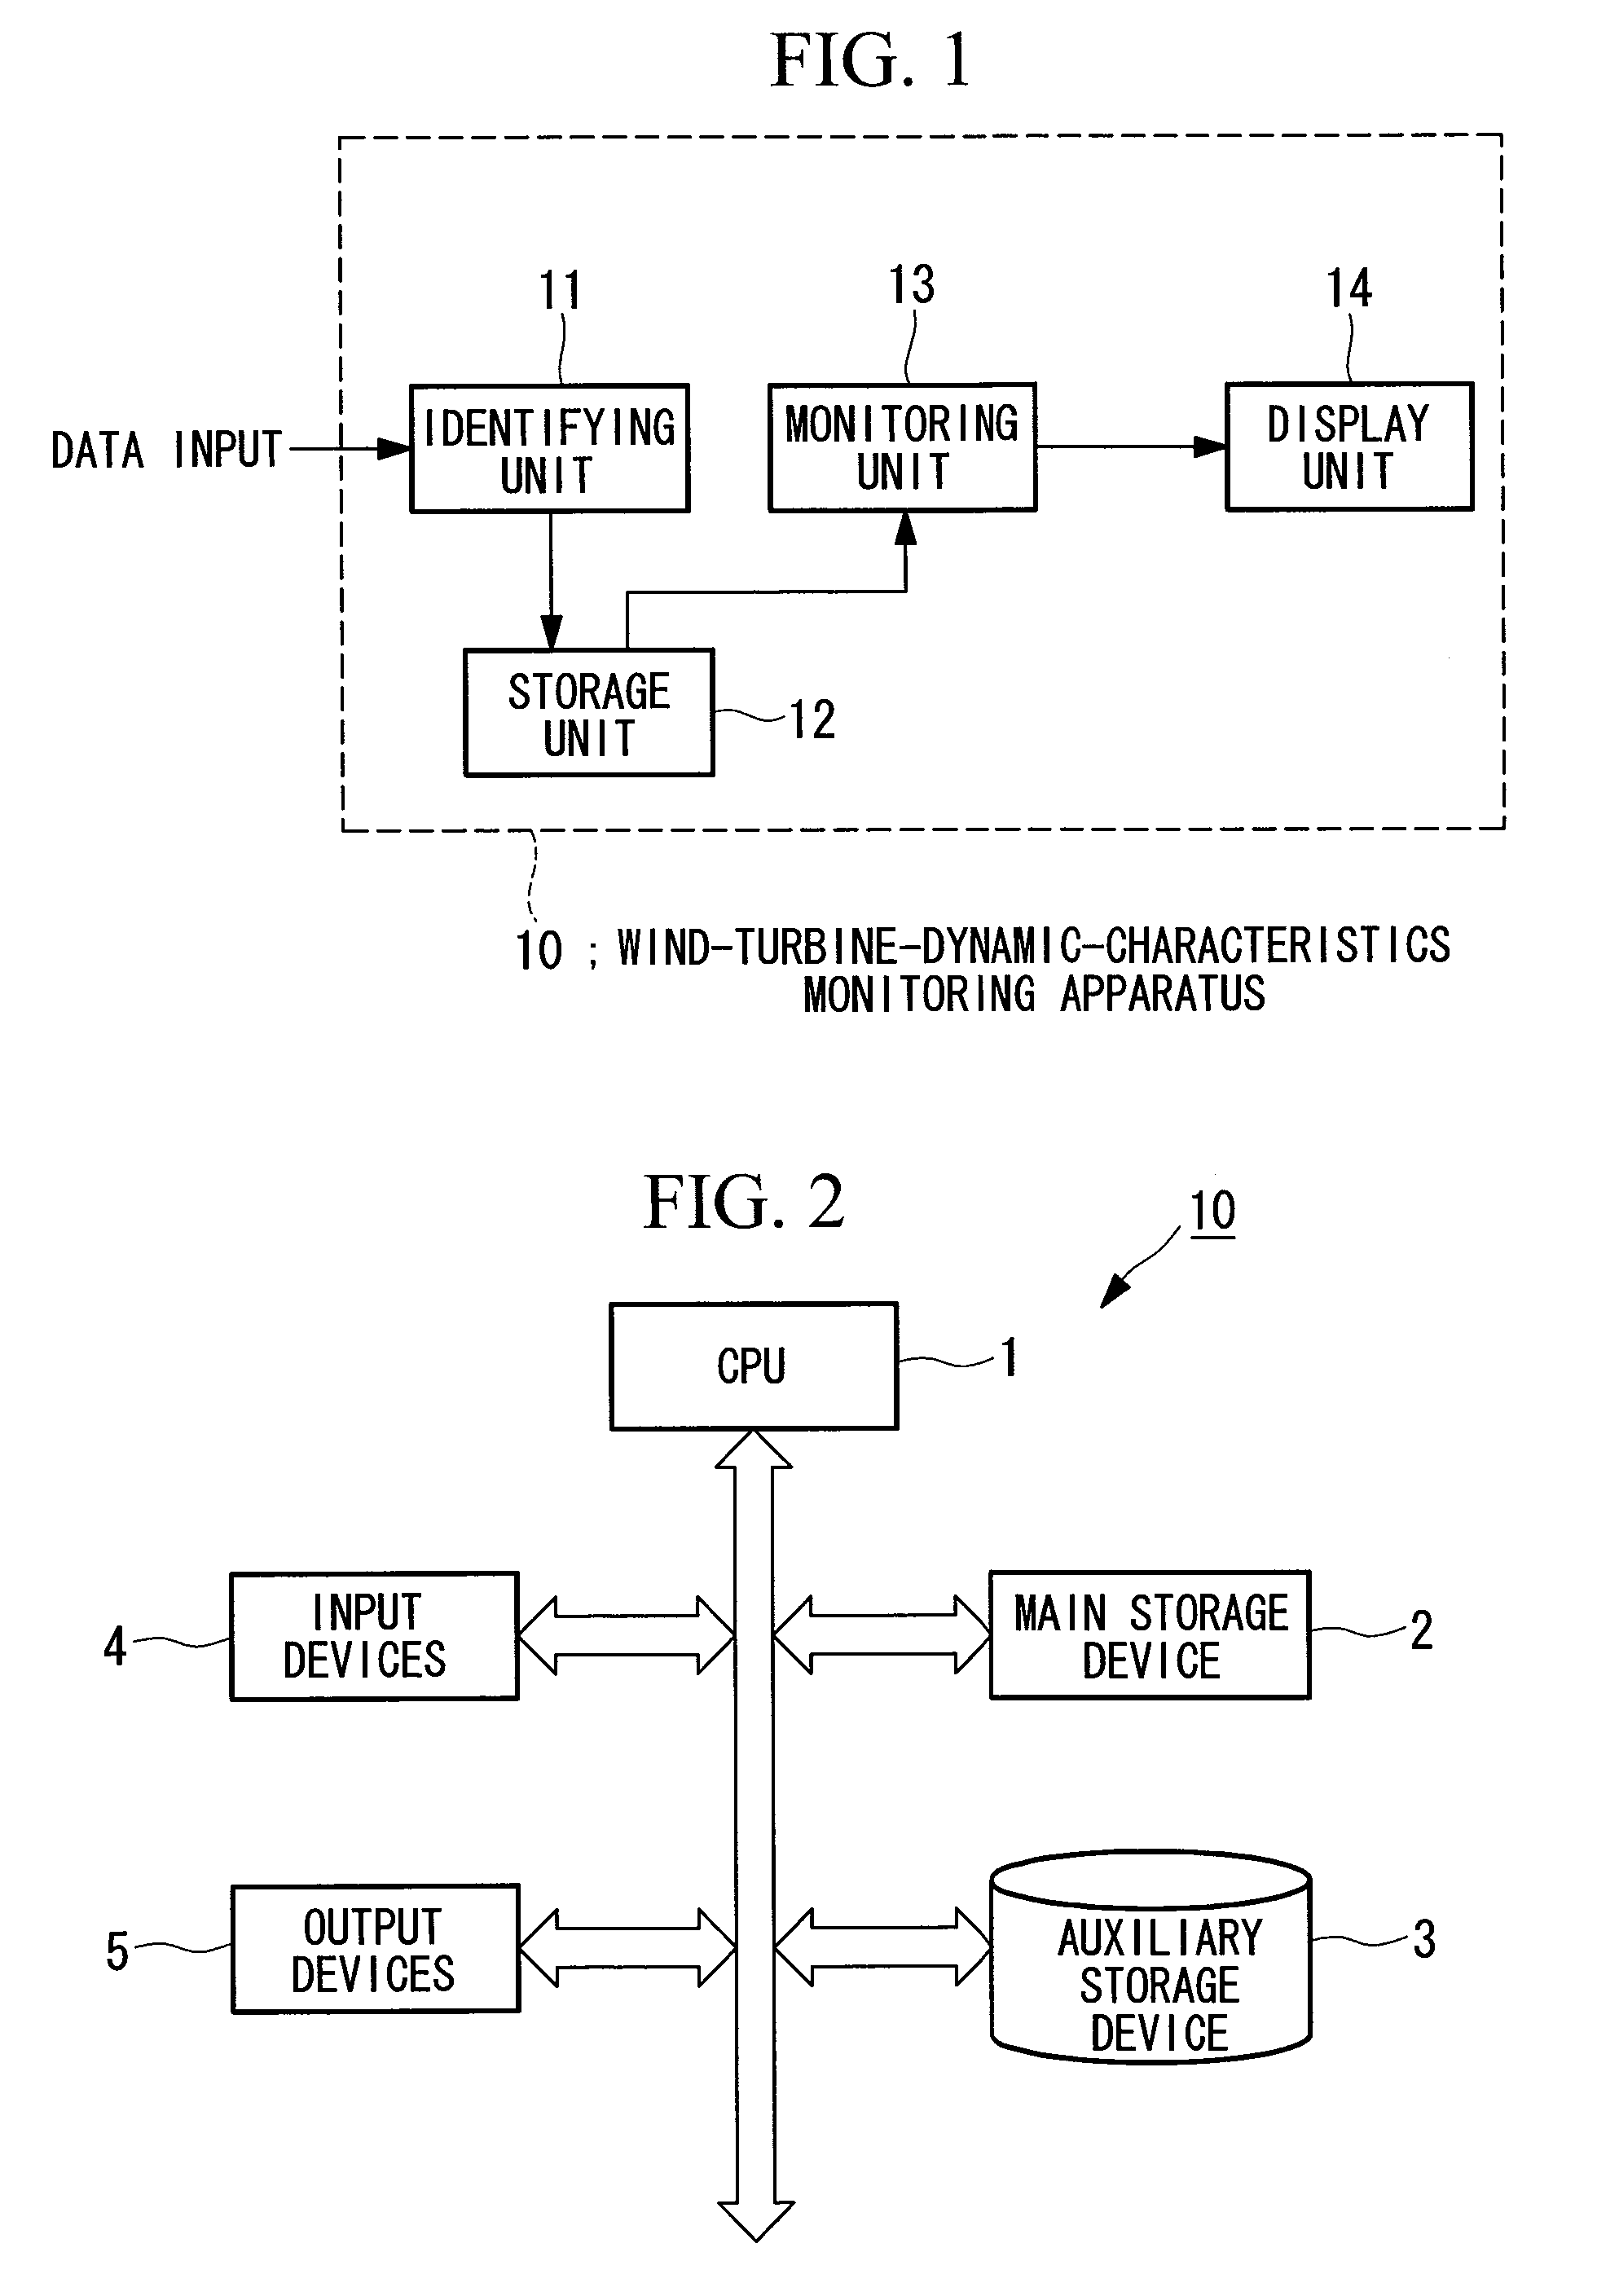 Wind-turbine-dynamic-characteristics monitoring apparatus and method therefor